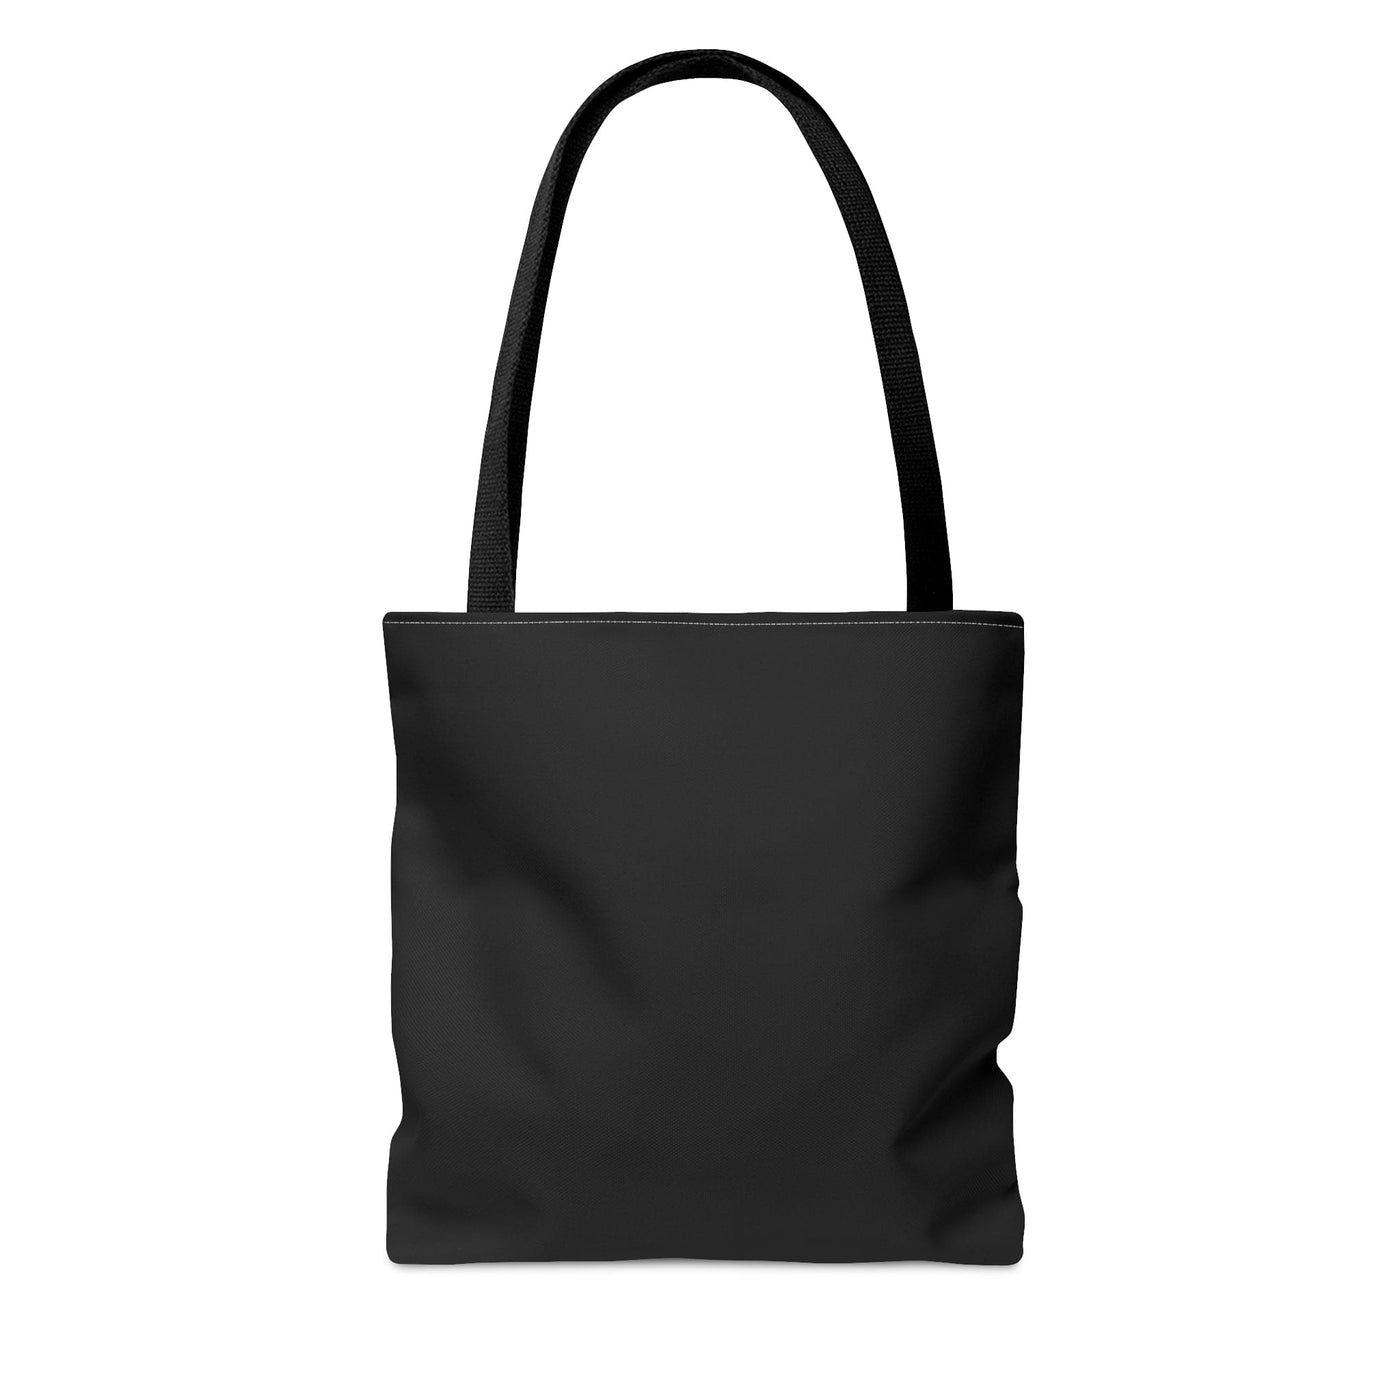 Canvas Tote Bag Awesome By Design White Print - Bags